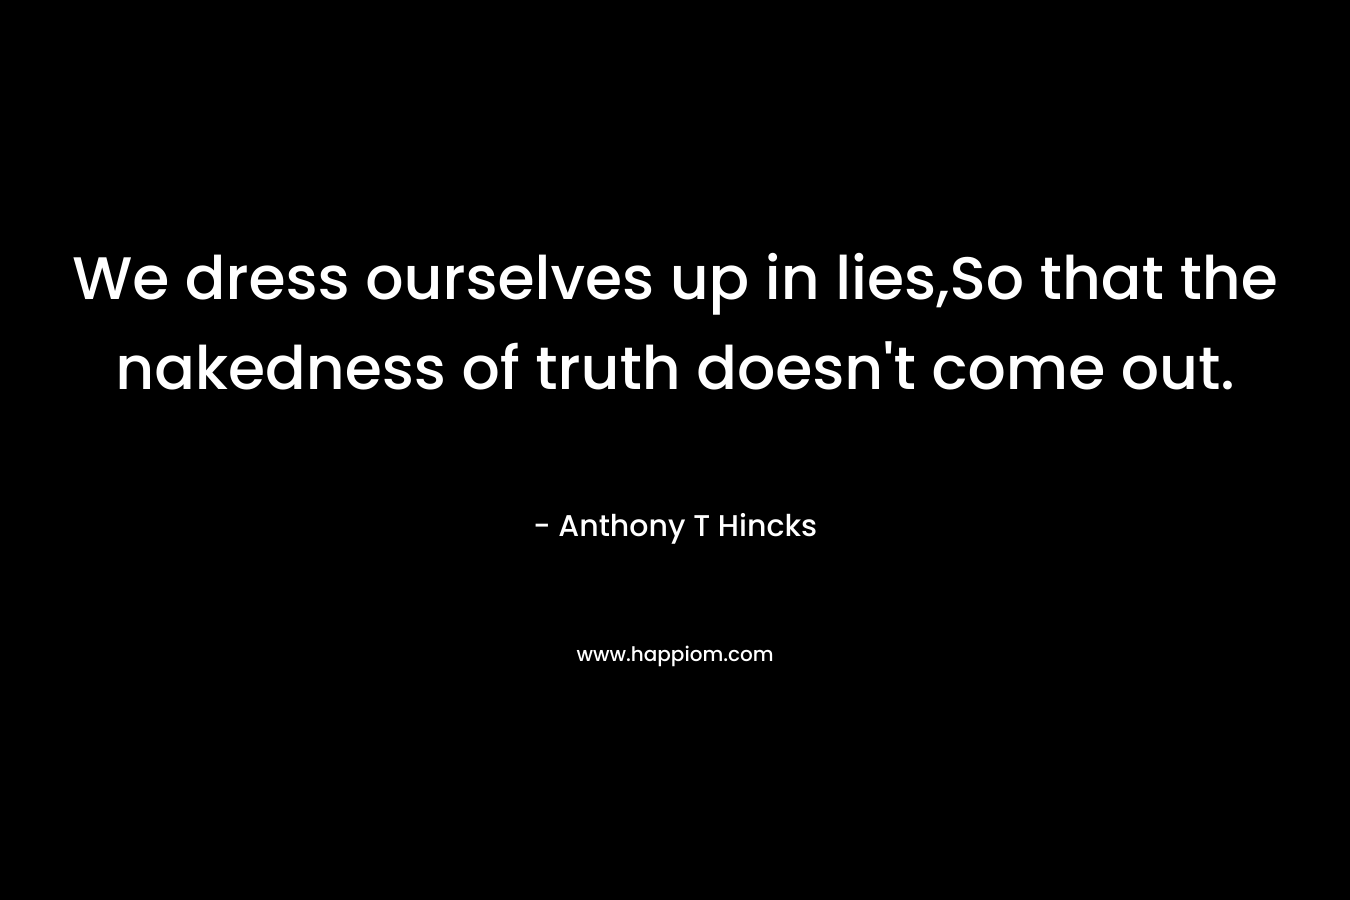 We dress ourselves up in lies,So that the nakedness of truth doesn't come out.